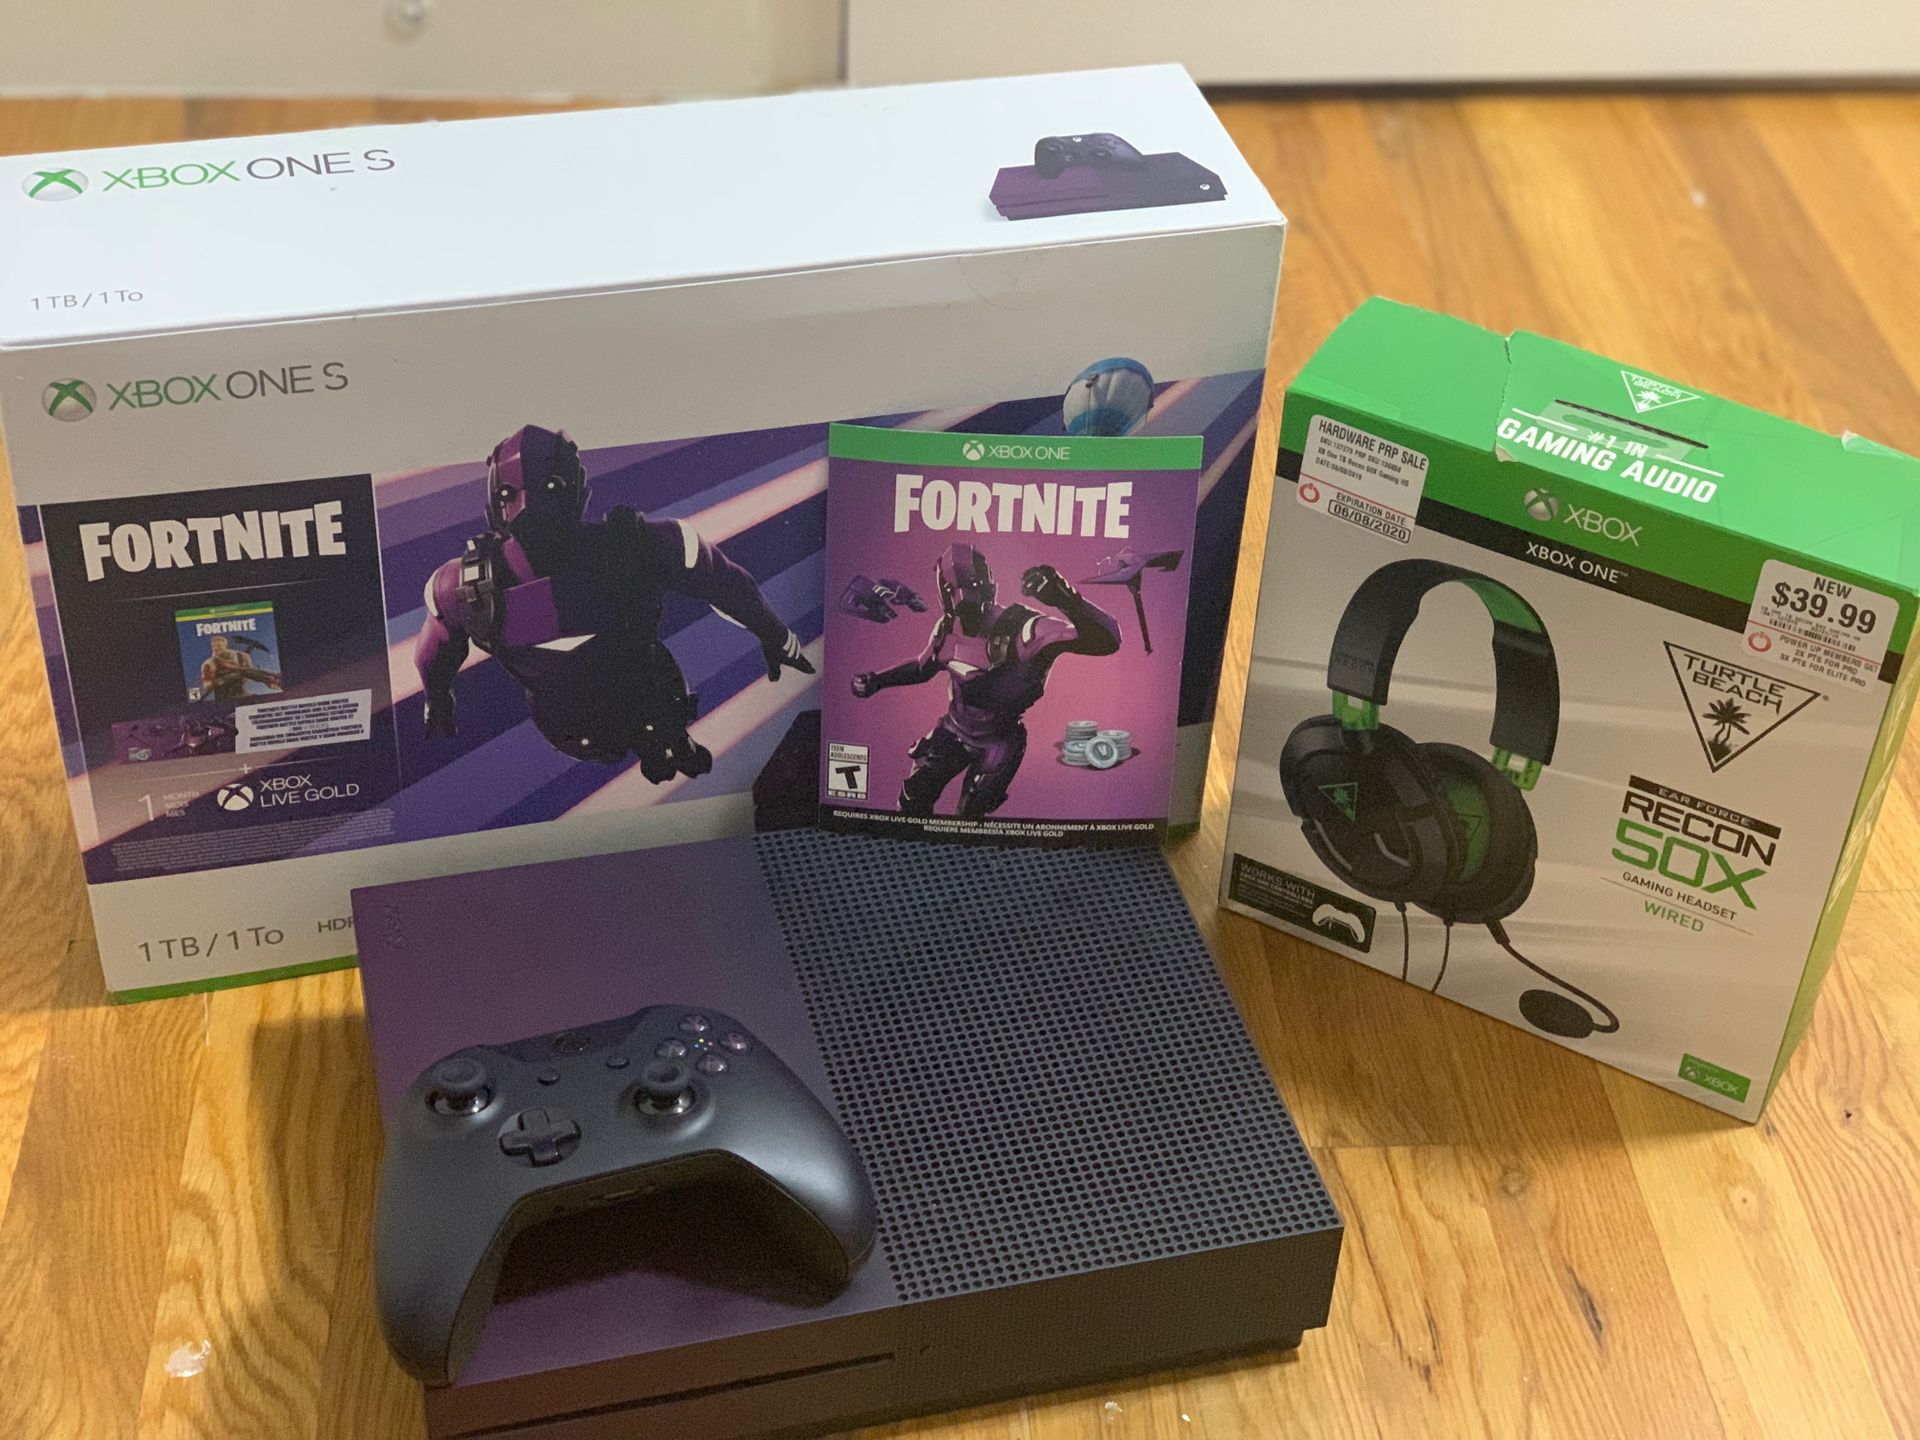 Fortnite Limited edition 1TB Xbox with brand new turtle beach headset and code for limited edition Fortnite player with battle axe and 2,000 VC points